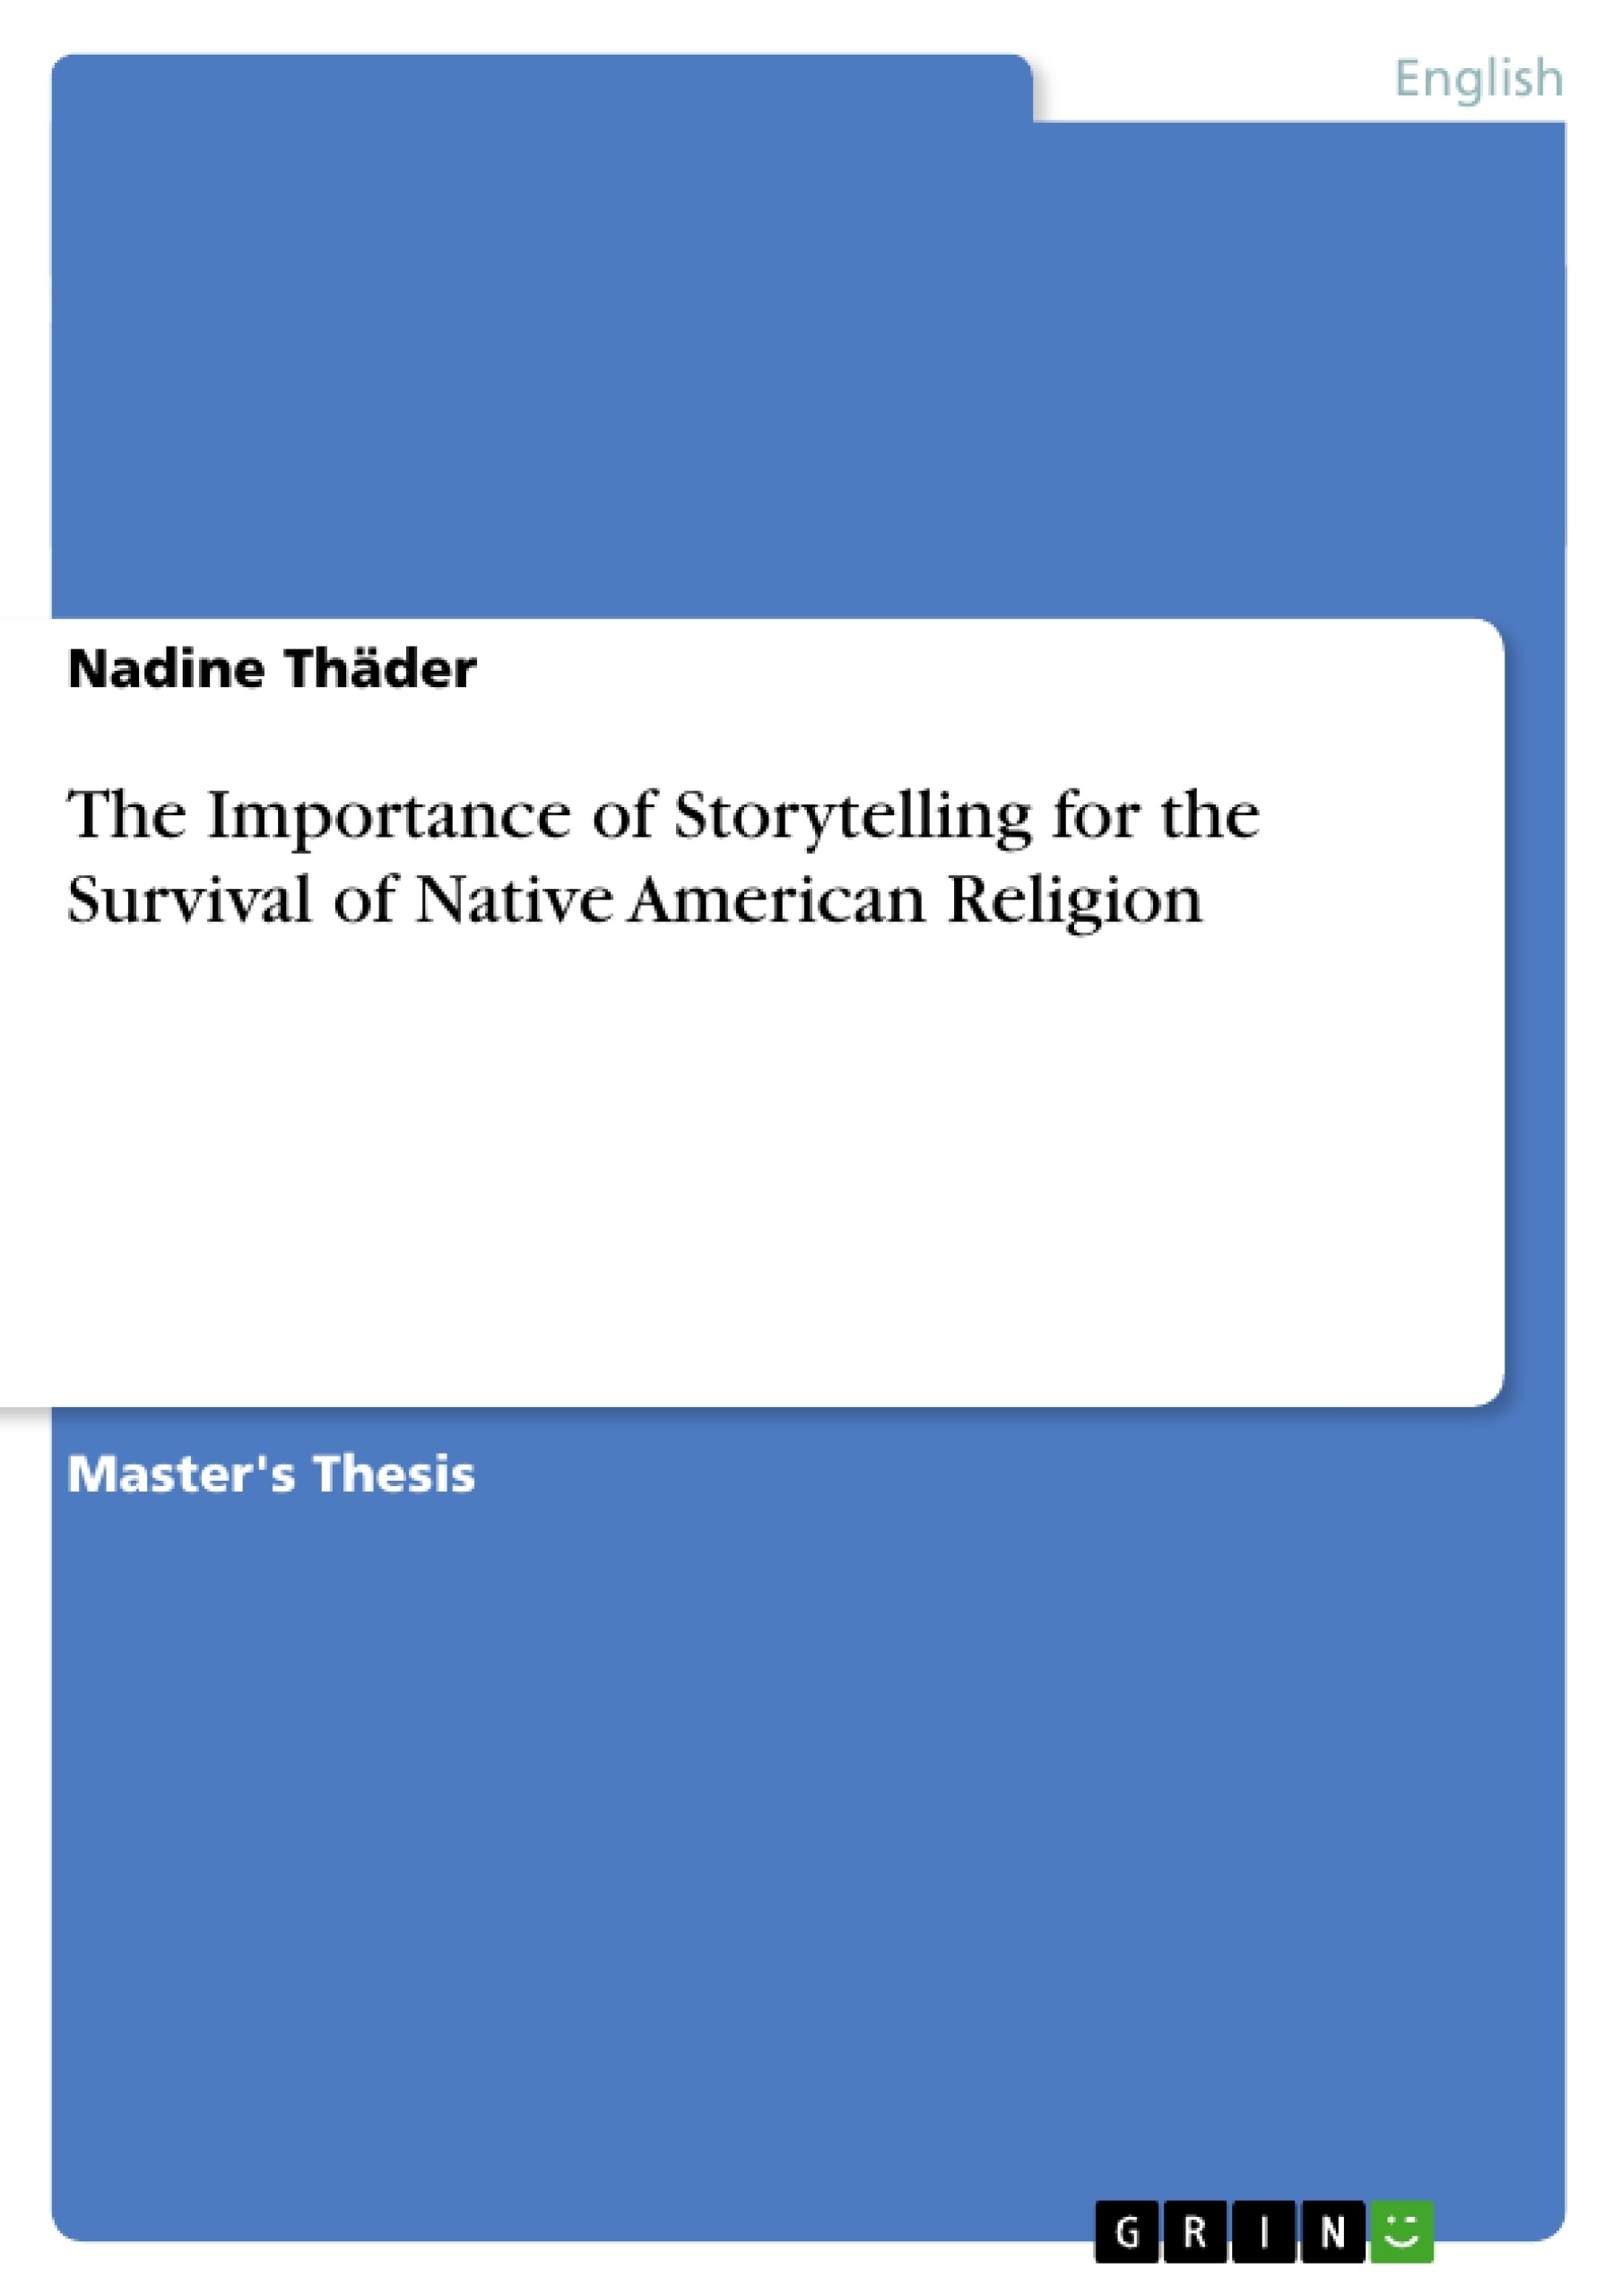 Title: The Importance of Storytelling for the Survival of Native American Religion